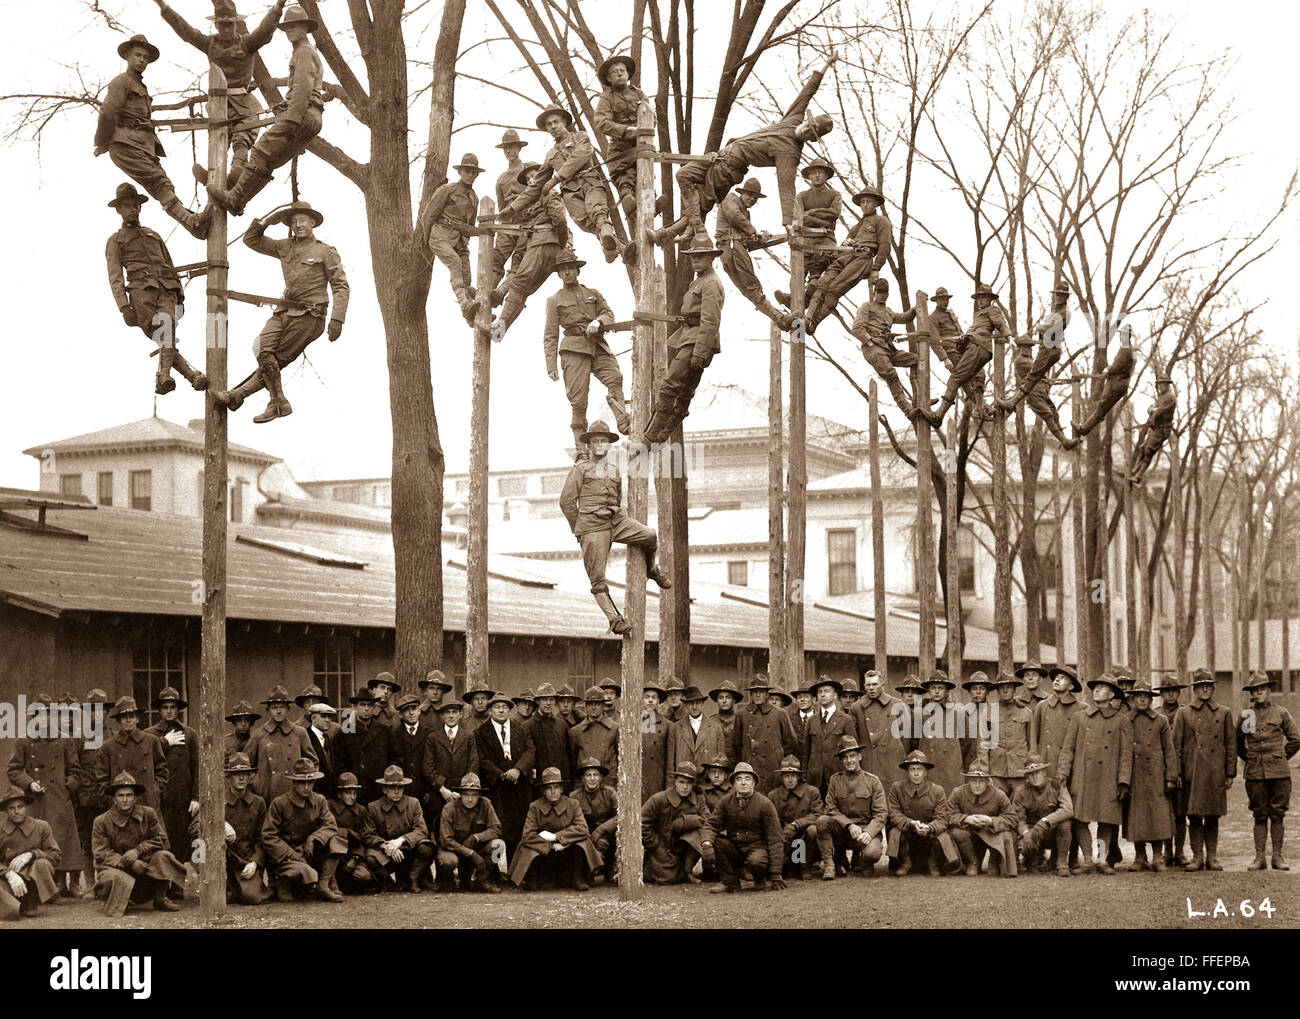 Vocational training for S.A.T.C. in University of Michigan, Ann Arbor.  Class in Pole-Climbing in the course for telelphone electricians, with some of their instructors.  Ca.  1918.    This archival print is available in the following sizes:    8' x 10'   $15.95 w/ FREE SHIPPING  11' x 14' $23.95 w/ FREE SHIPPING  16' x 20' $59.95 w/ FREE SHIPPING  20' x 24' $99.95 w/ FREE SHIPPING    * The American Photoarchive watermark will not appear on your print. Stock Photo